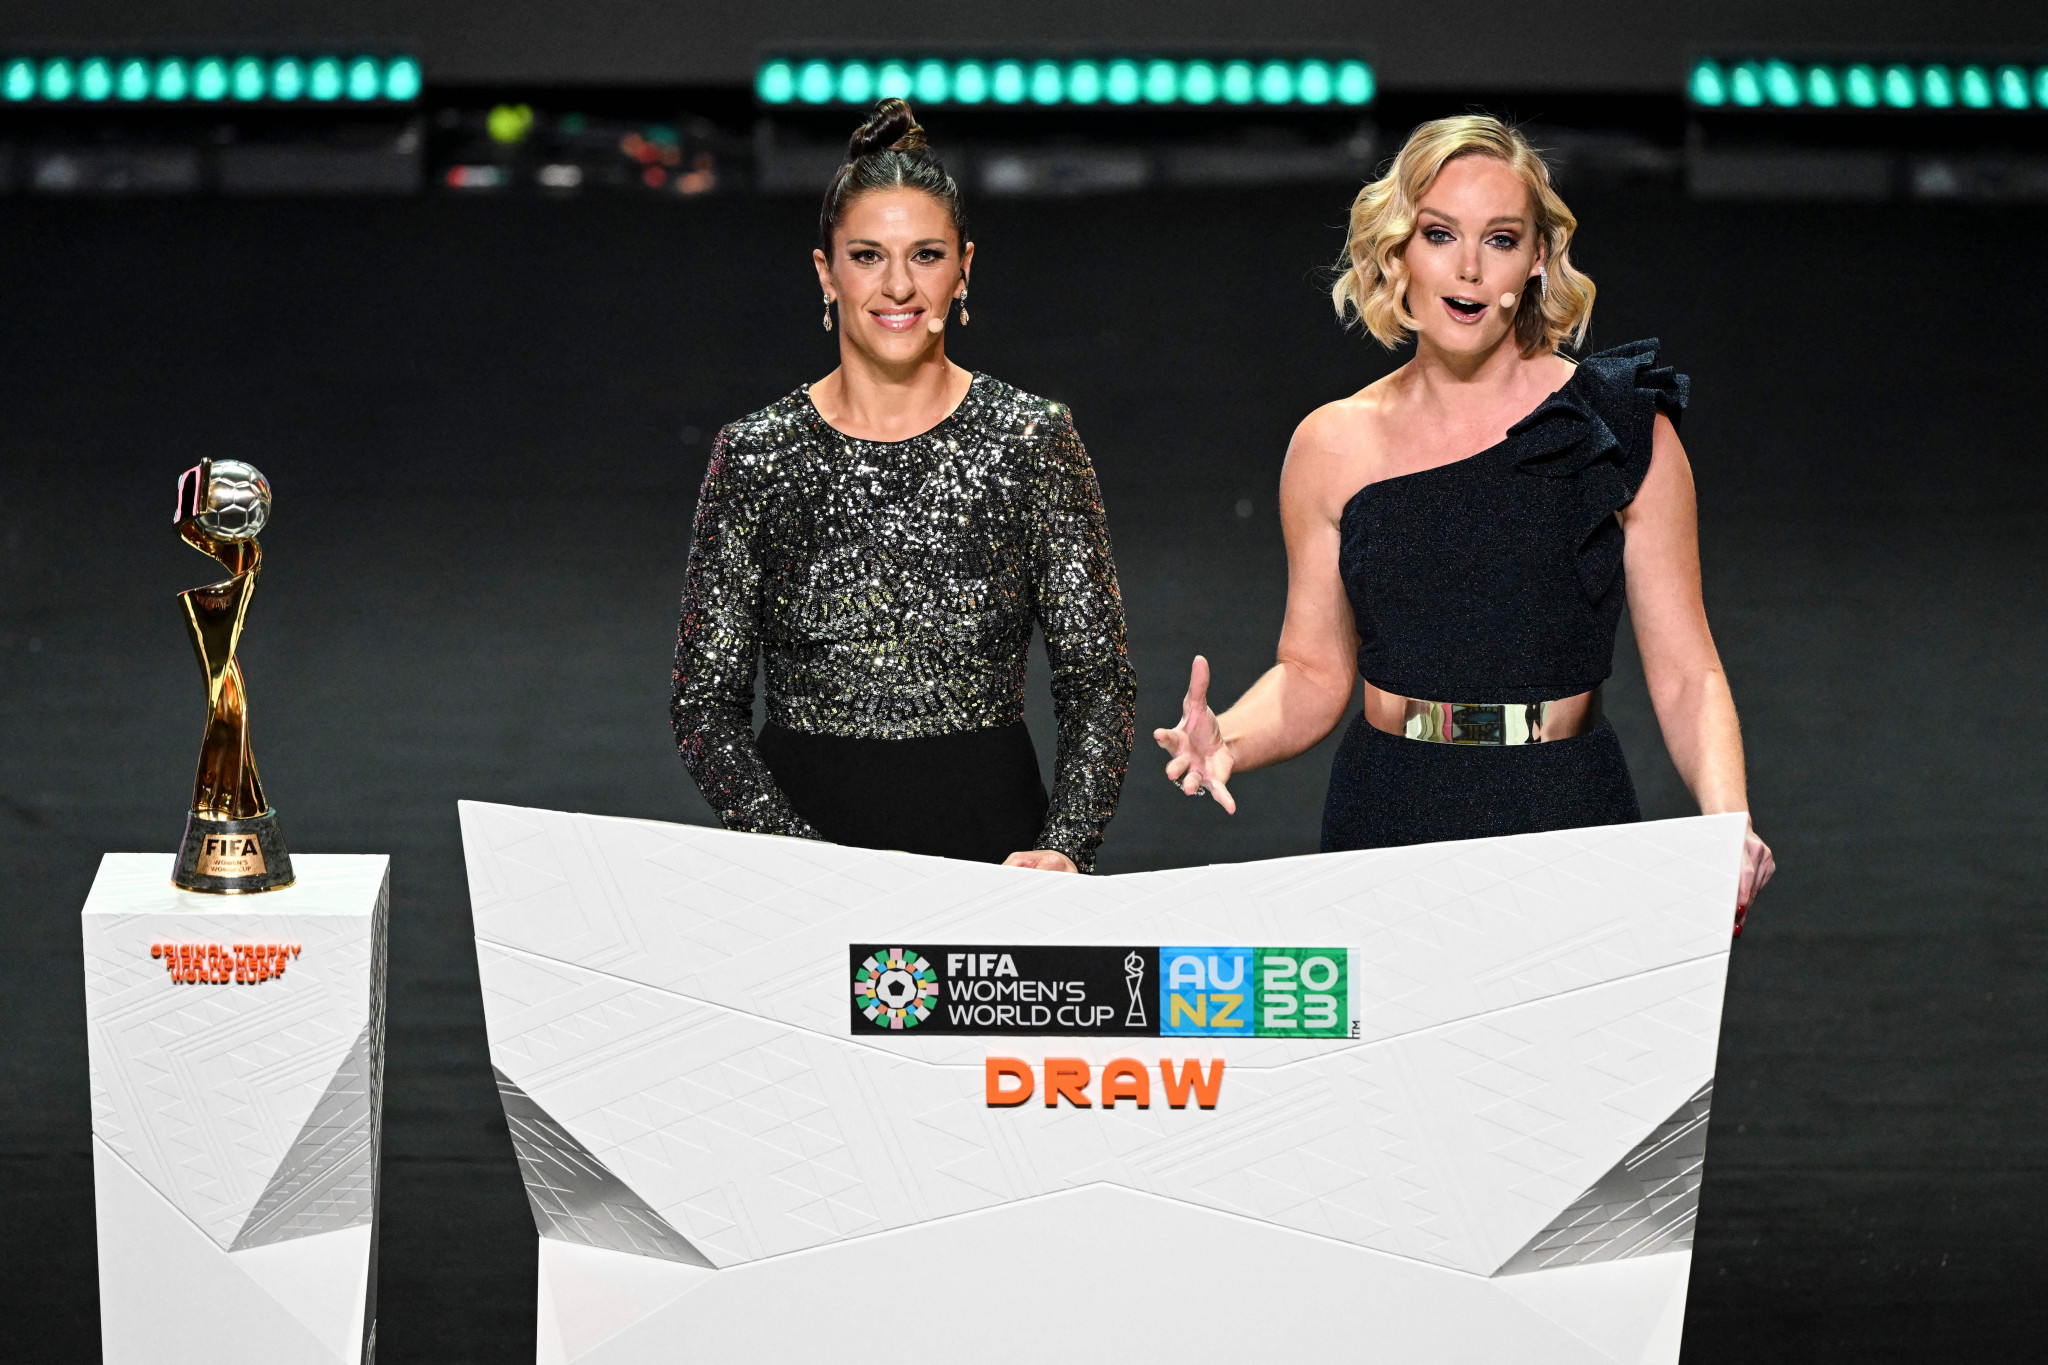 Potential United States and England final drawn for 2023 FIFA Women's World Cup